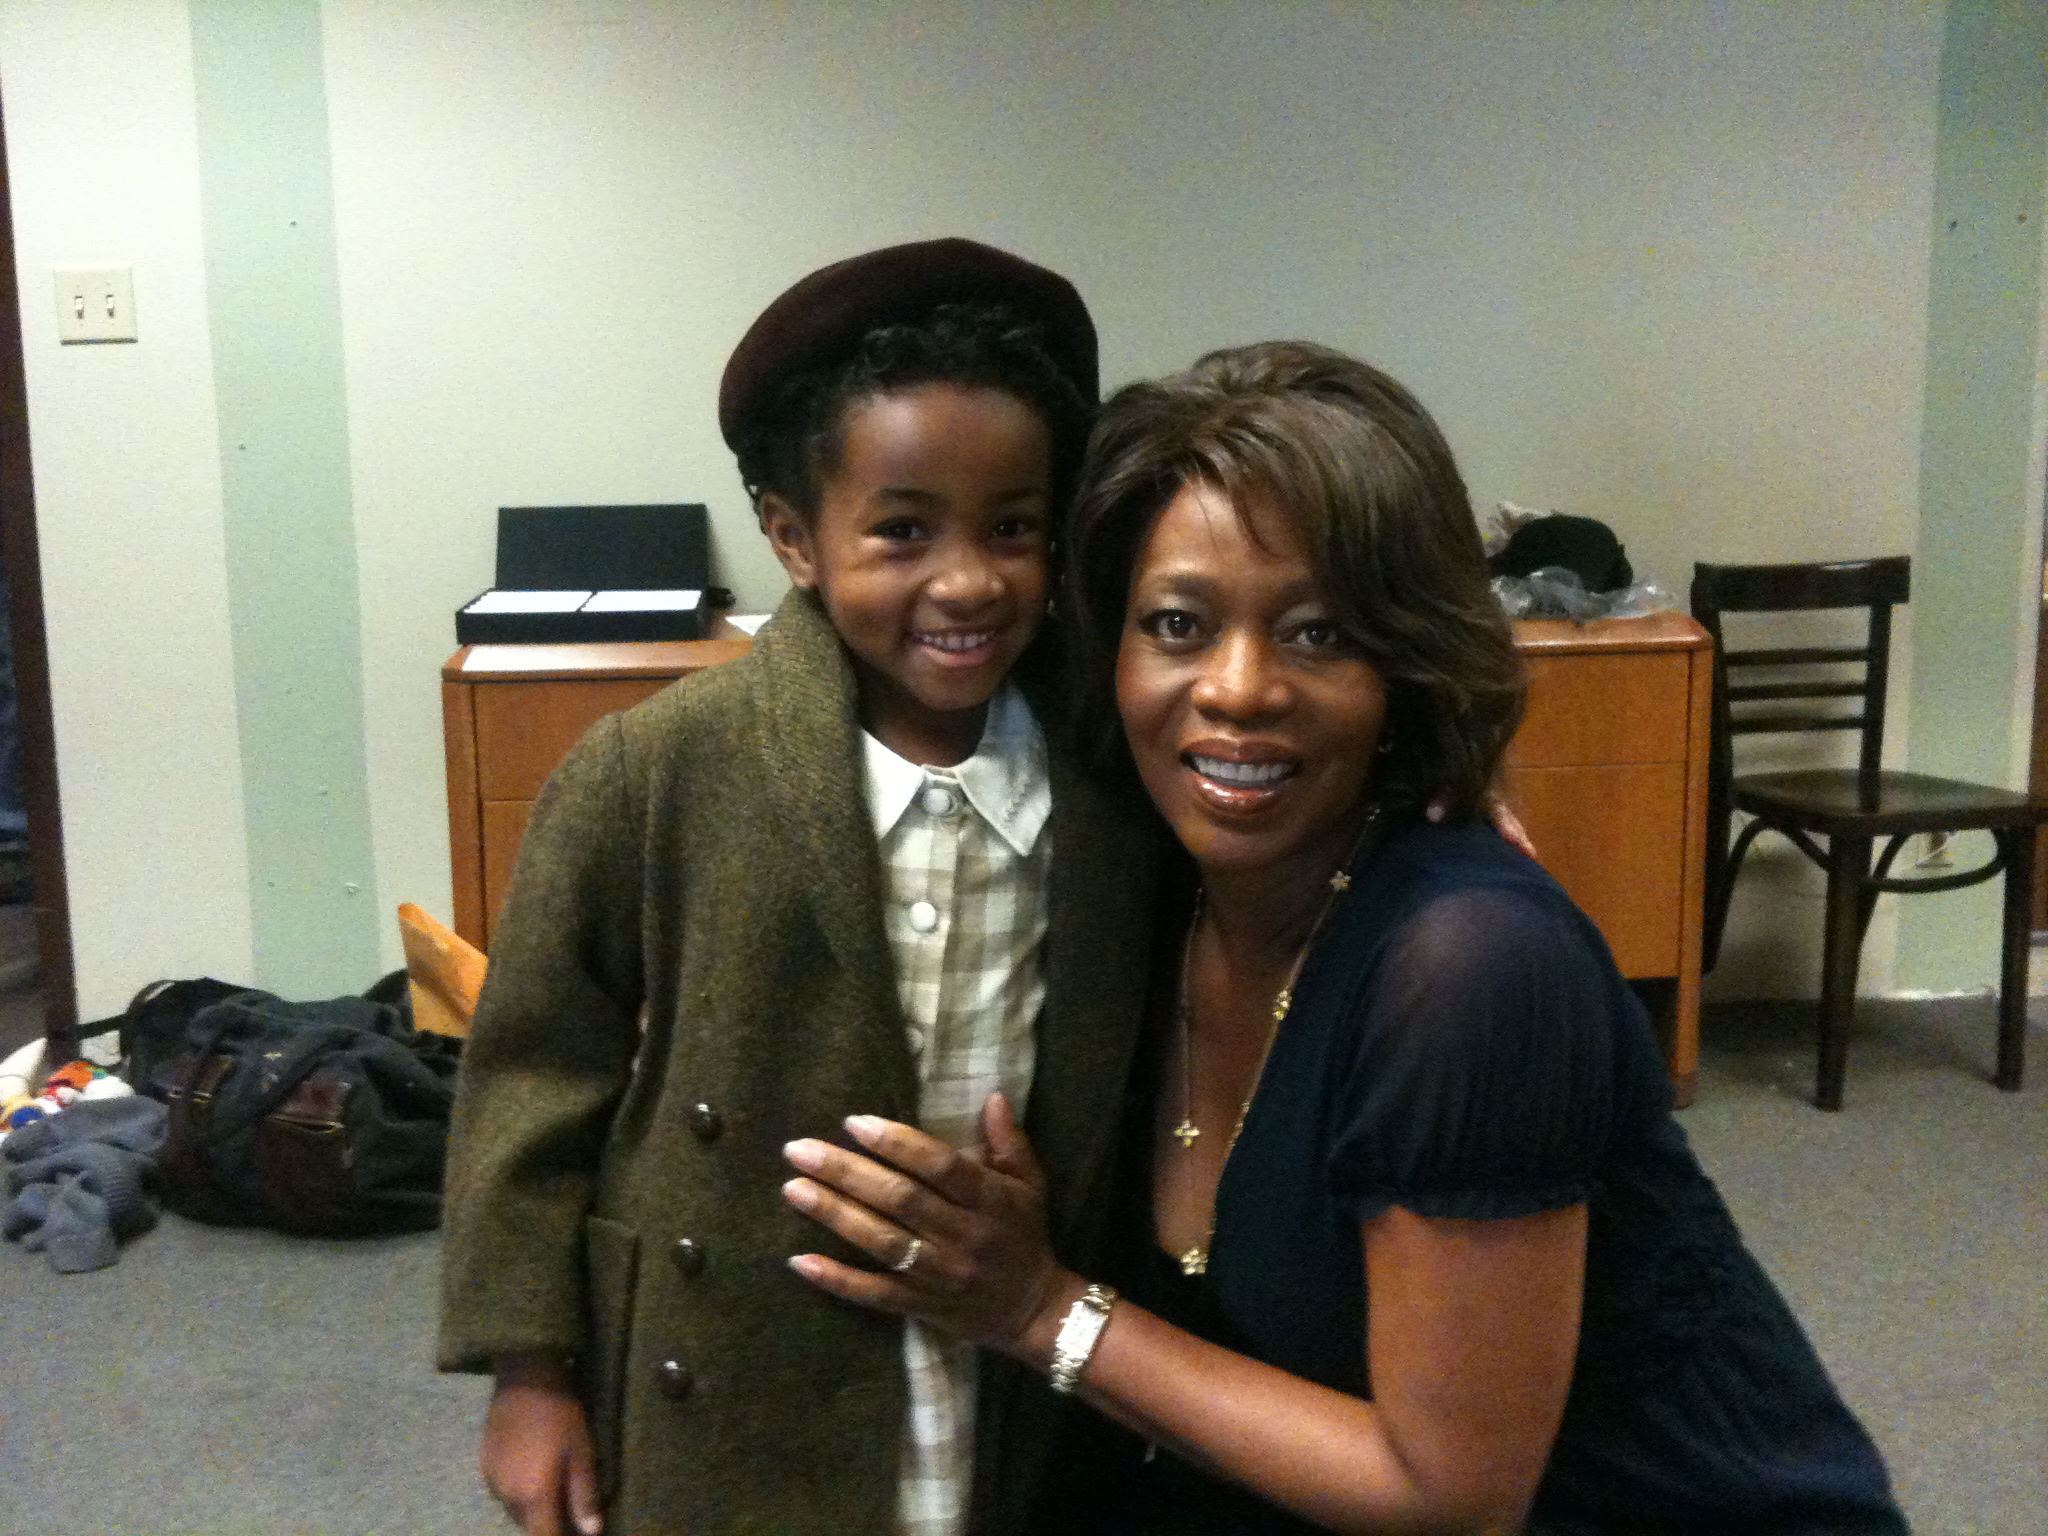 Layla with Alfre Woodard on set for PSA for National Womens History Museum